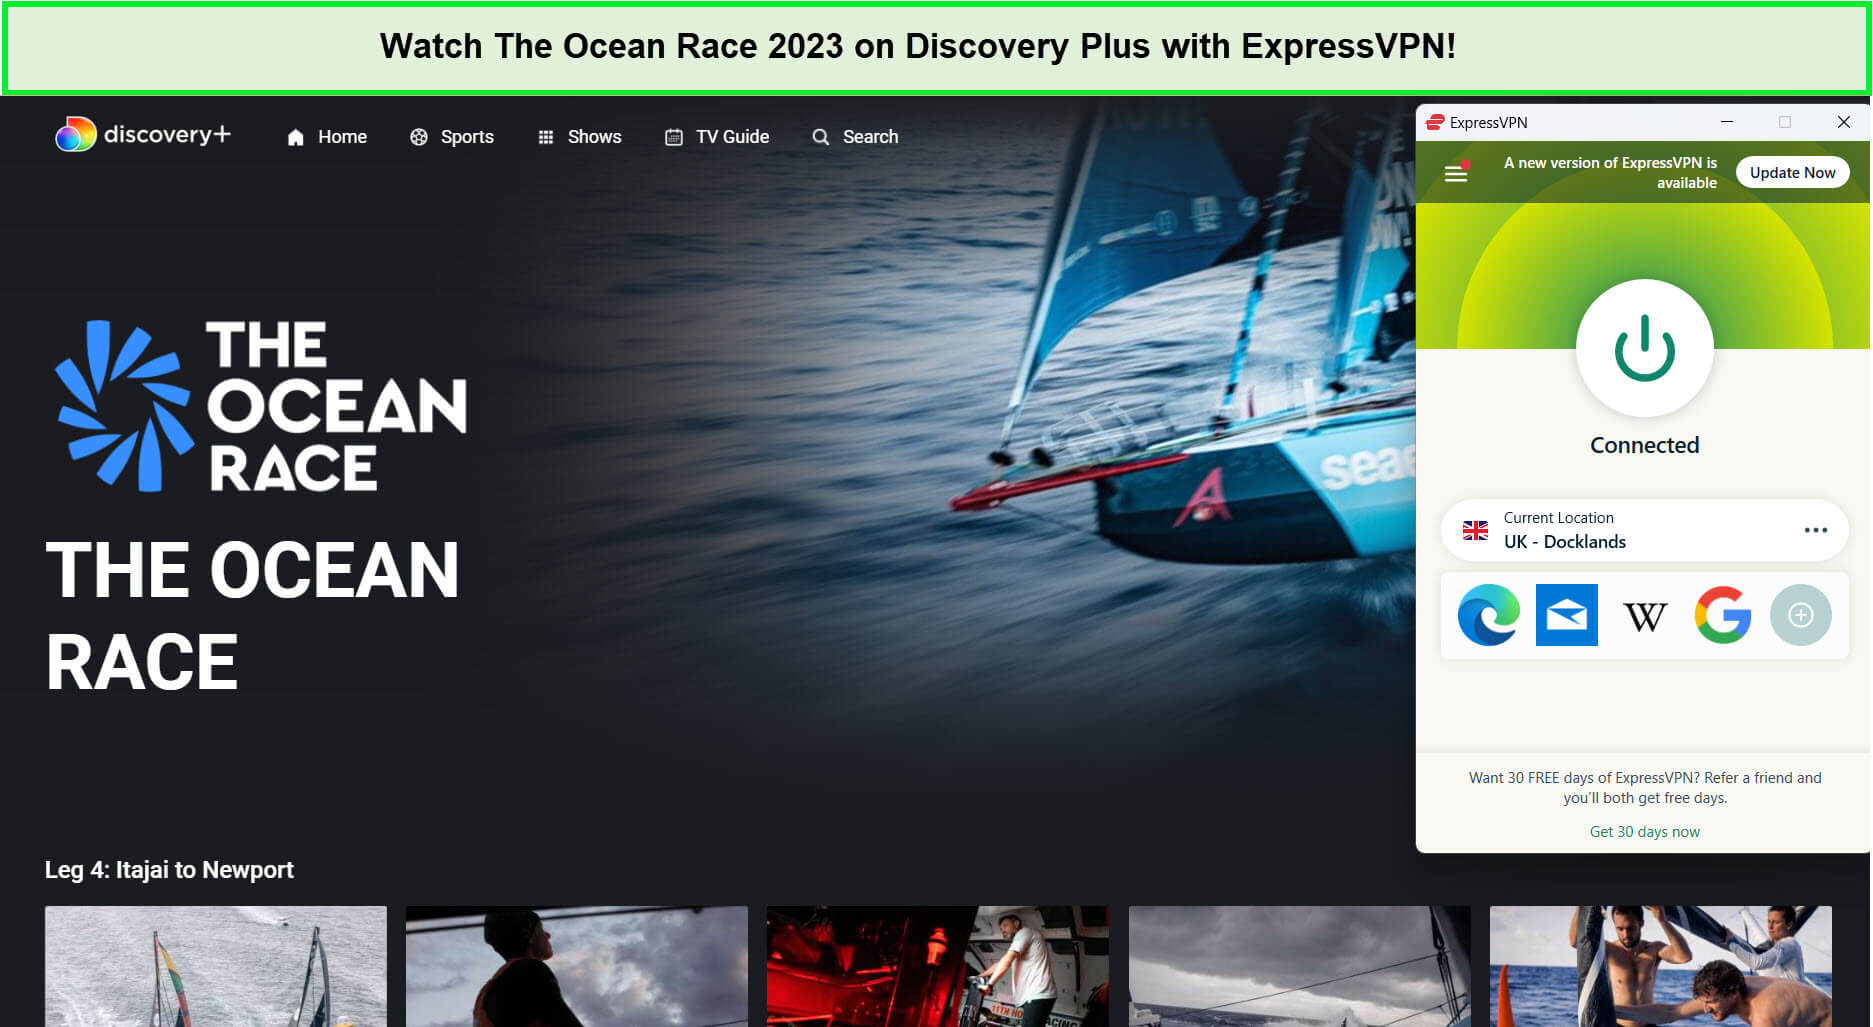 expressvpn-unblocks-the-ocean-race-2023-live-in-France-on-discovery-plus